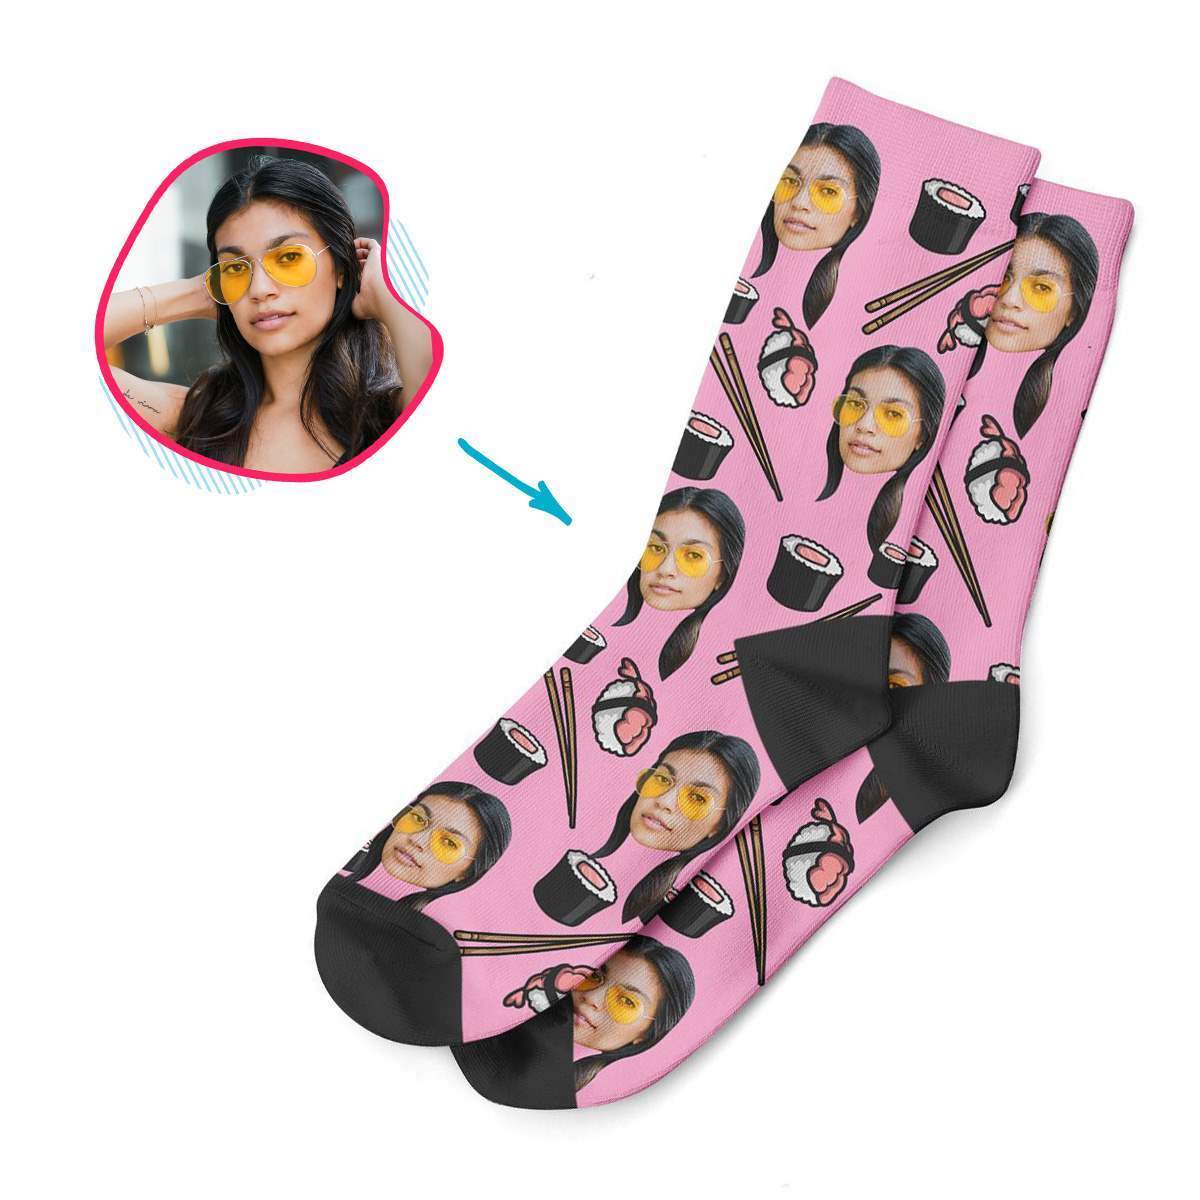 pink Sushi socks personalized with photo of face printed on them